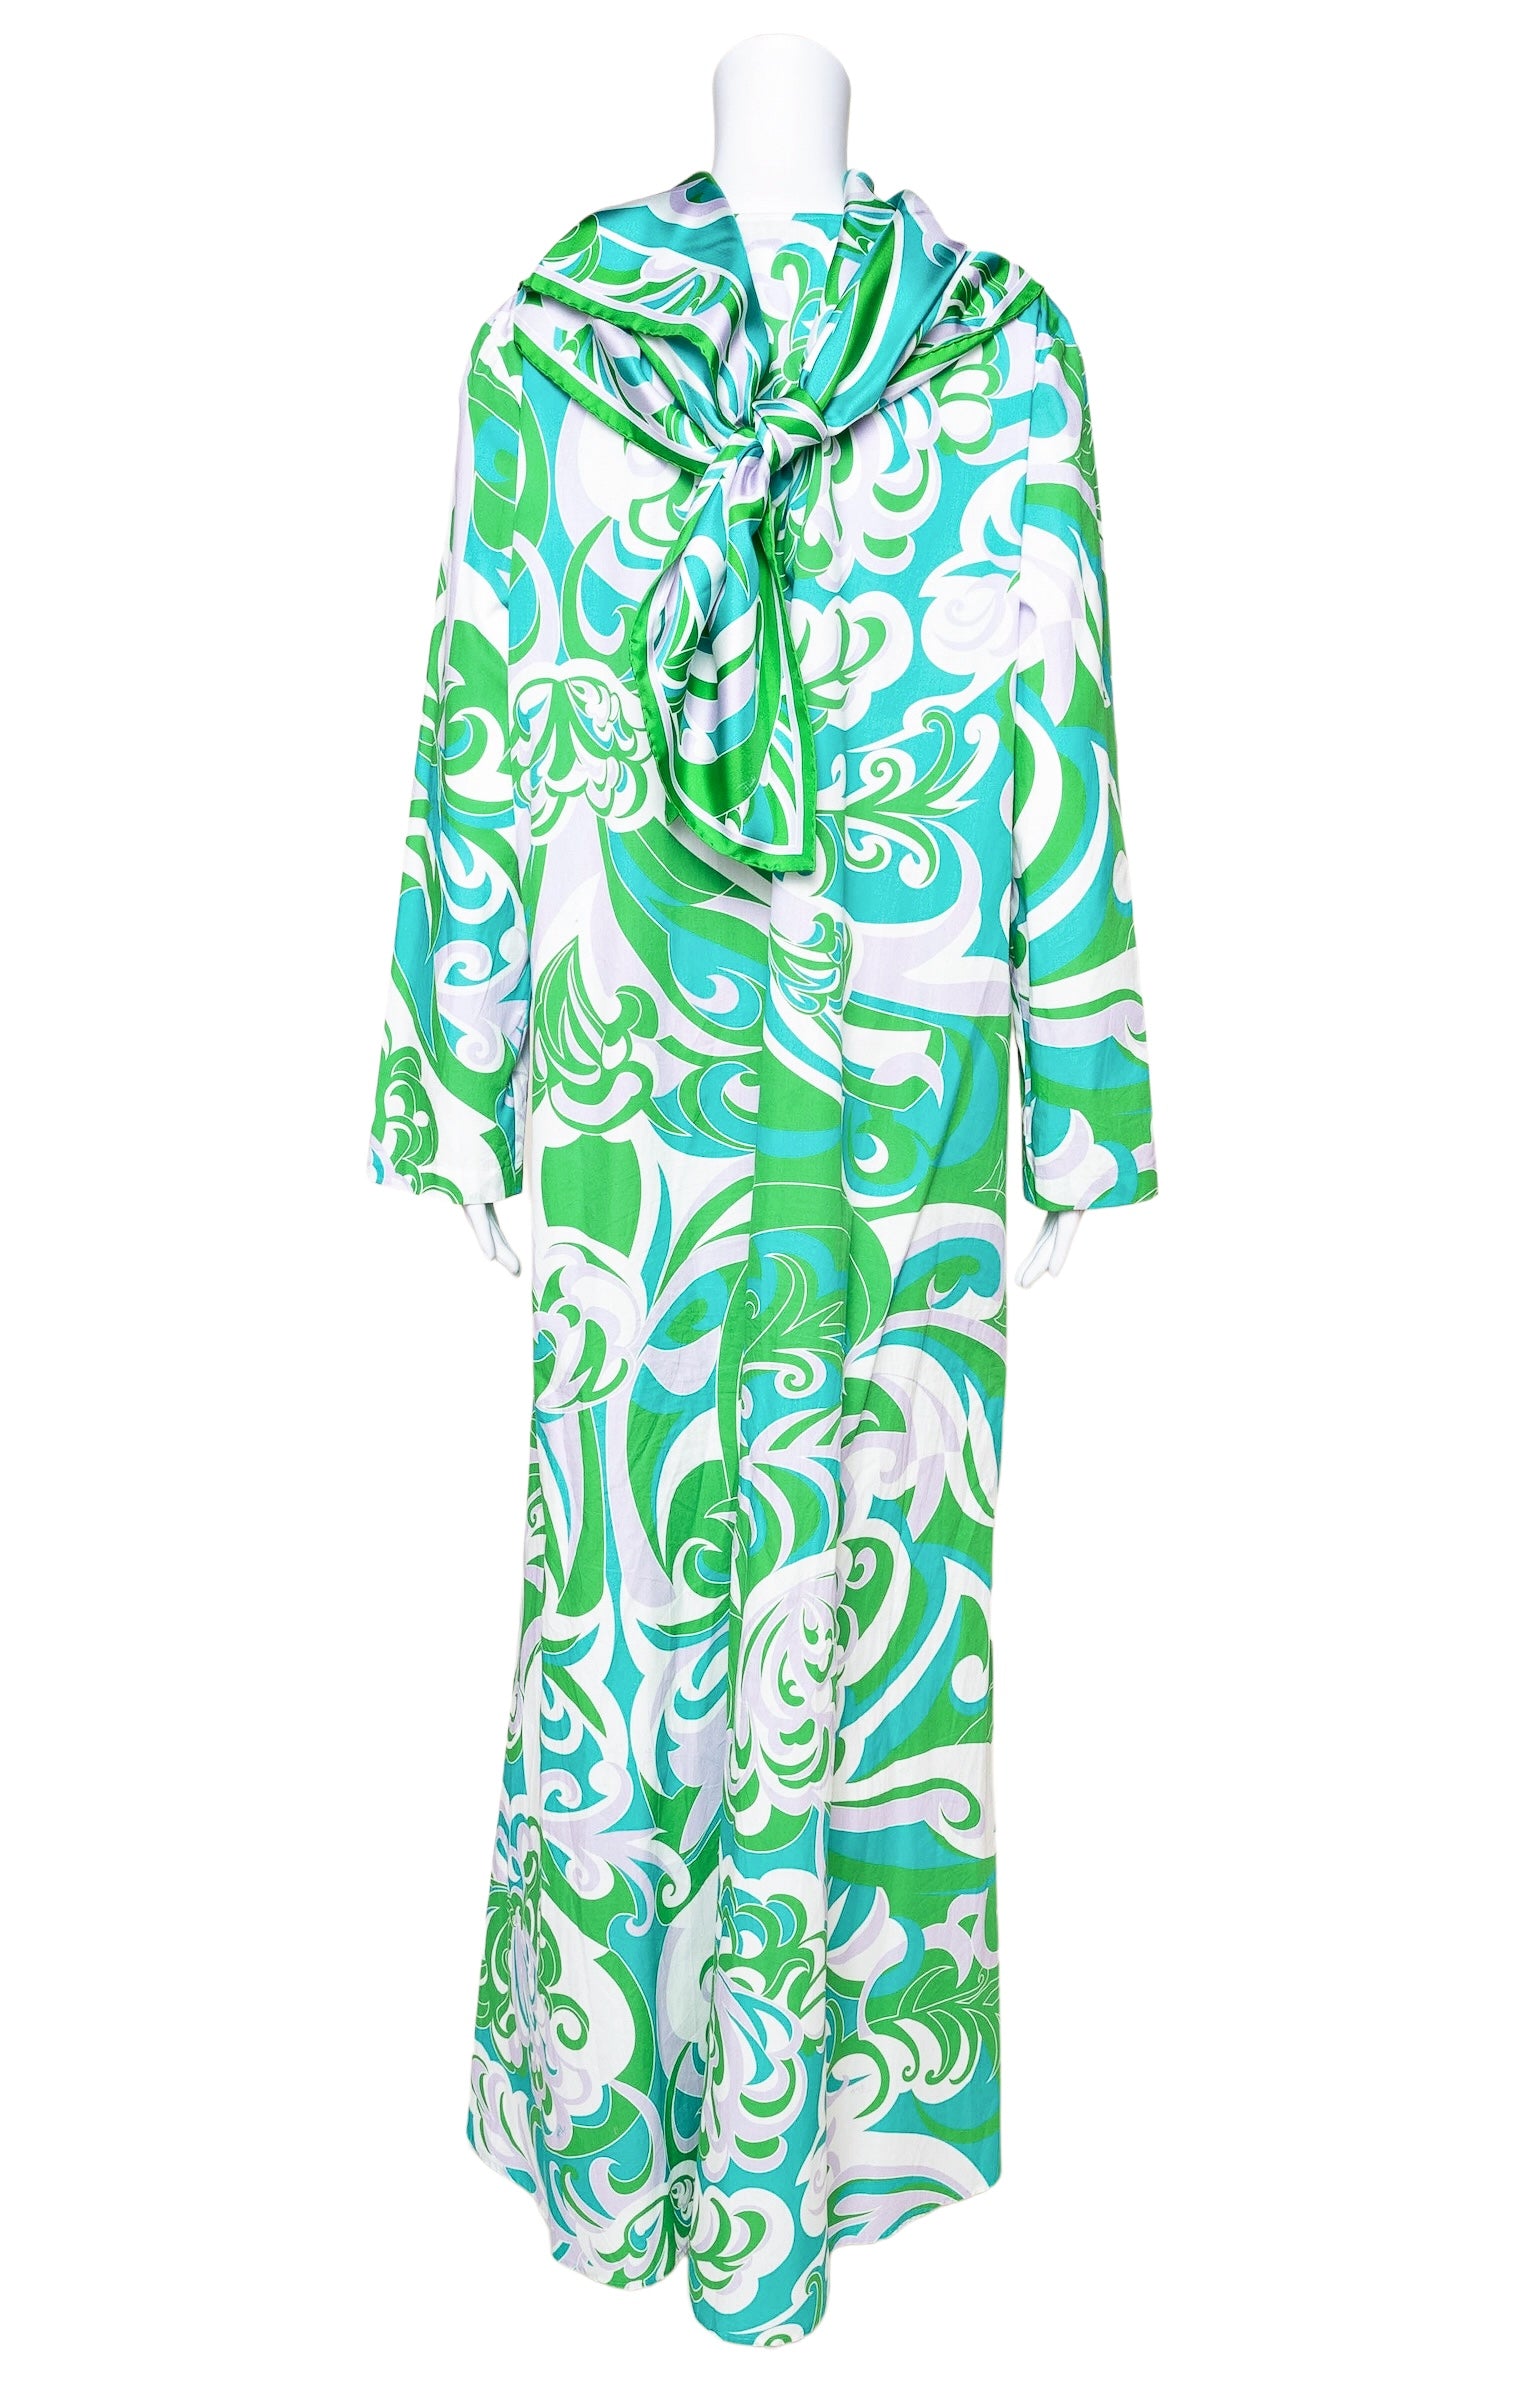 EMILIO PUCCI SUSTAINABLE (RARE & NEW) with tags Dress & Scarf Size: Dress - Marked a US 6 but fits like OSFM Scarf - 34.5" x 34.5"